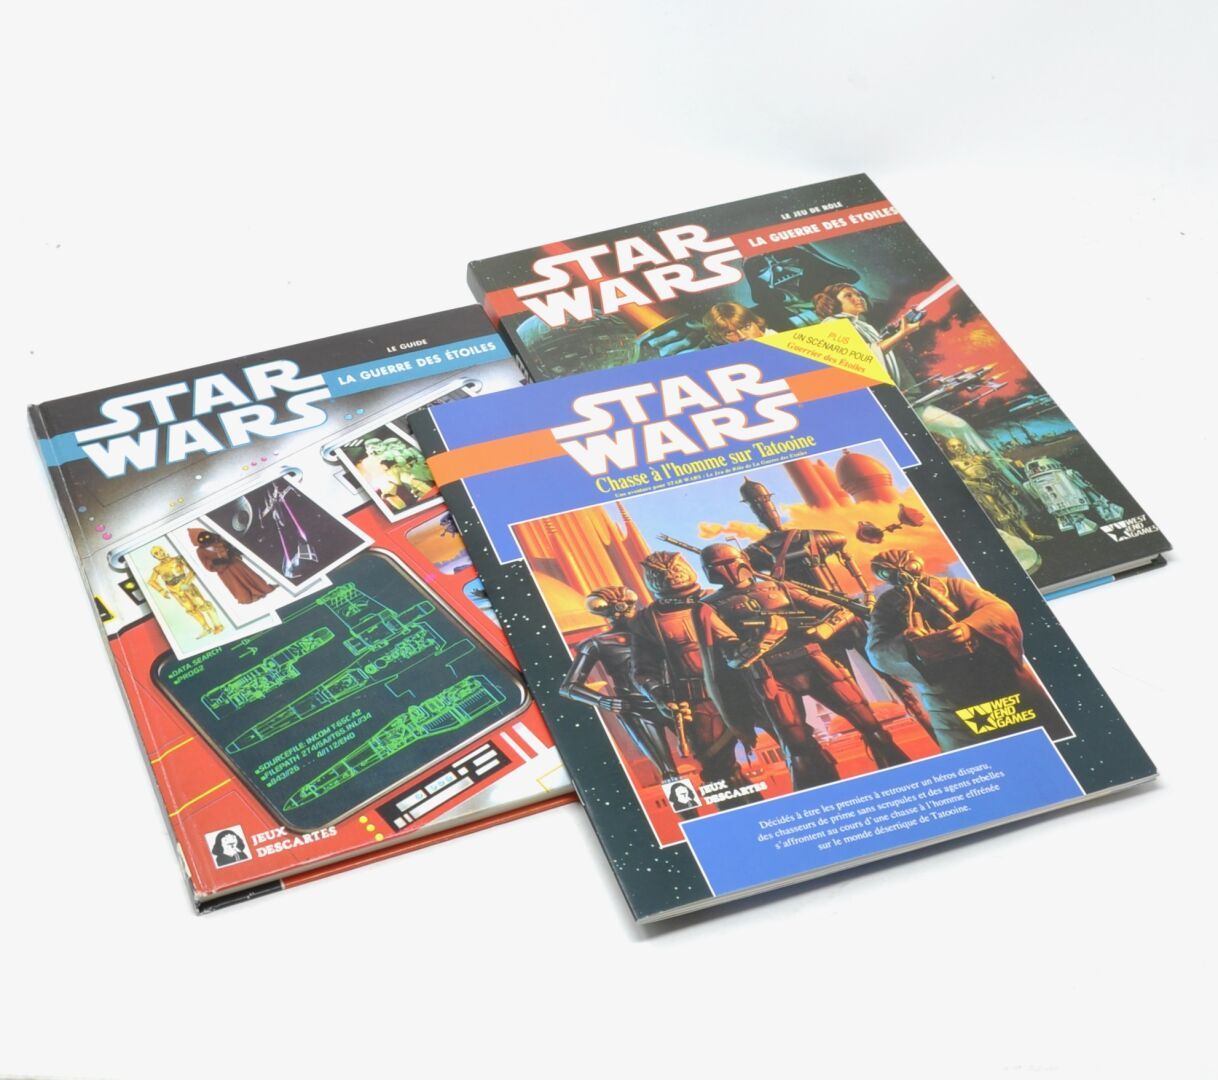 Null STAR WARS

Books and reviews of role-playing games on the Star Wars univers&hellip;